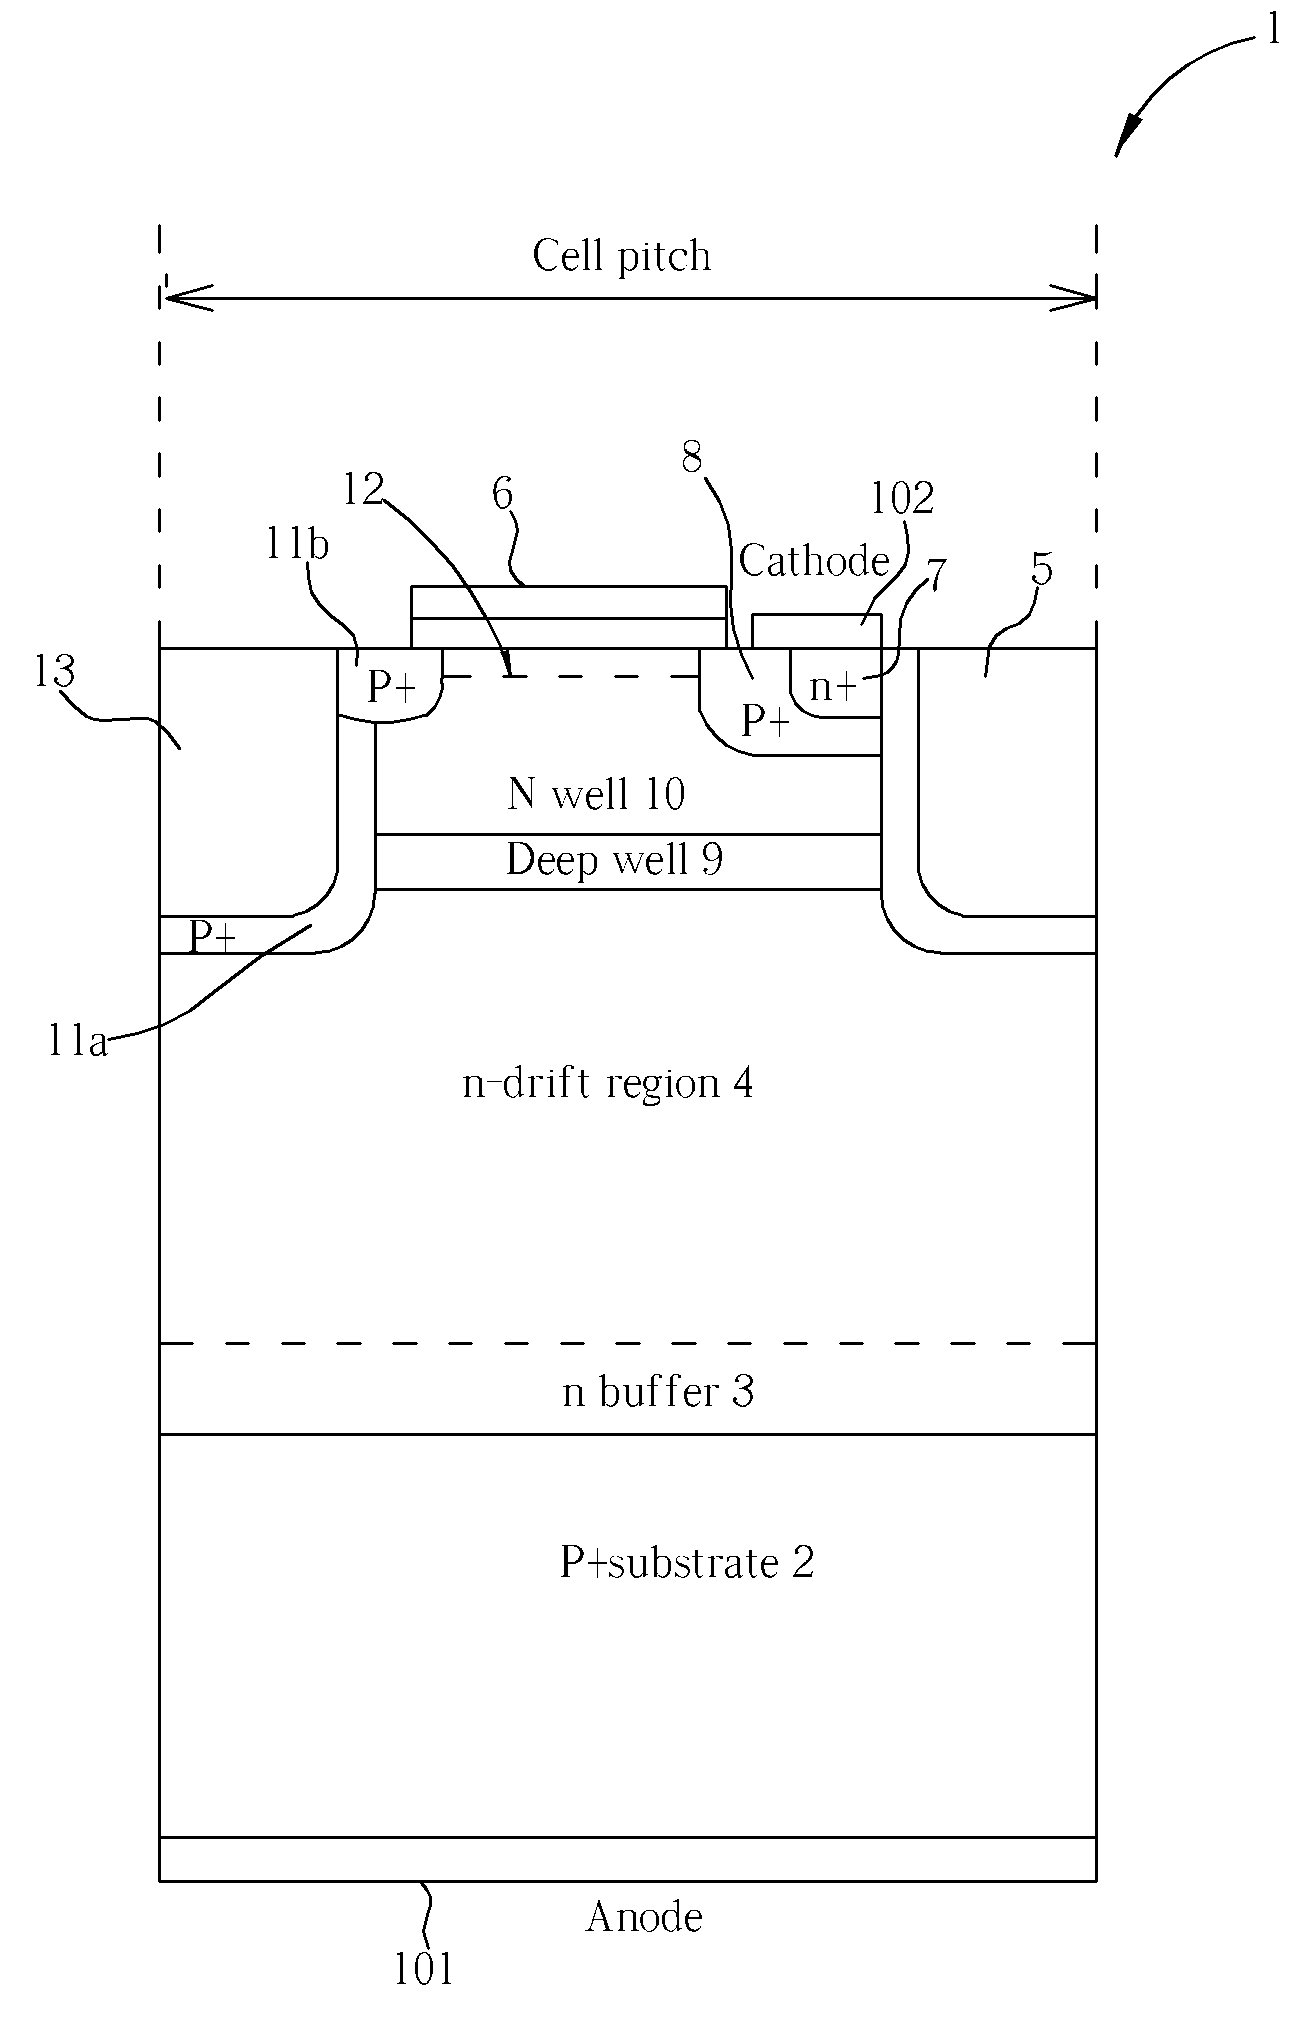 Insulated gate bipolar transistor device comprising a depletion-mode MOSFET